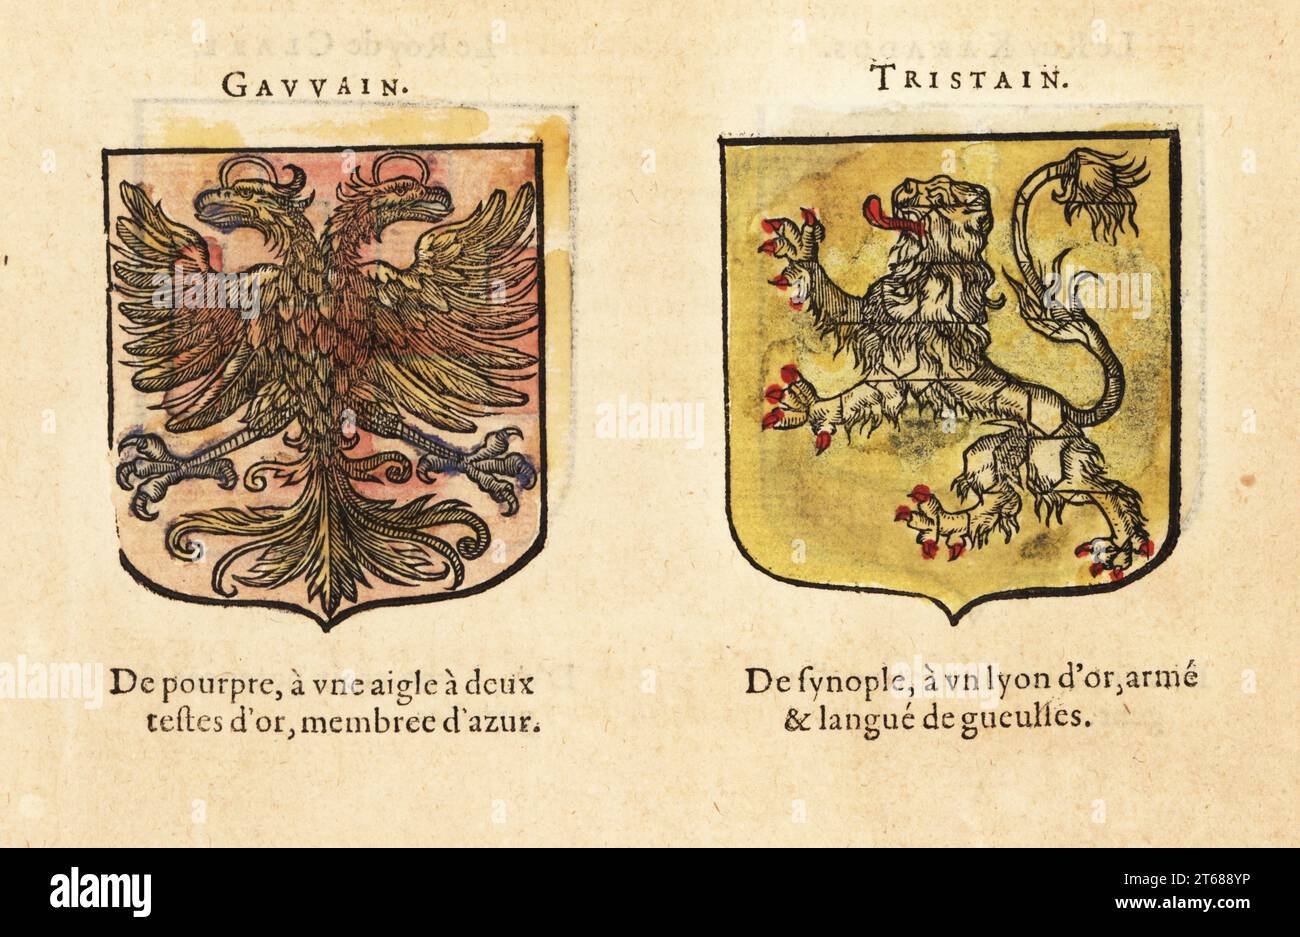 Imaginary coats of arms of King Arthurs Knights of the Round Table: Gawain with two-headed eagle, Tristan with golden lion. Chevaliers de la table ronde: GAVVAIN, TRISTAIN. Handcoloured woodblock engraving from Hierosme de Baras Le Blason des Armoiries, Chez Rolet Boutonne, Paris, 1628. Stock Photo